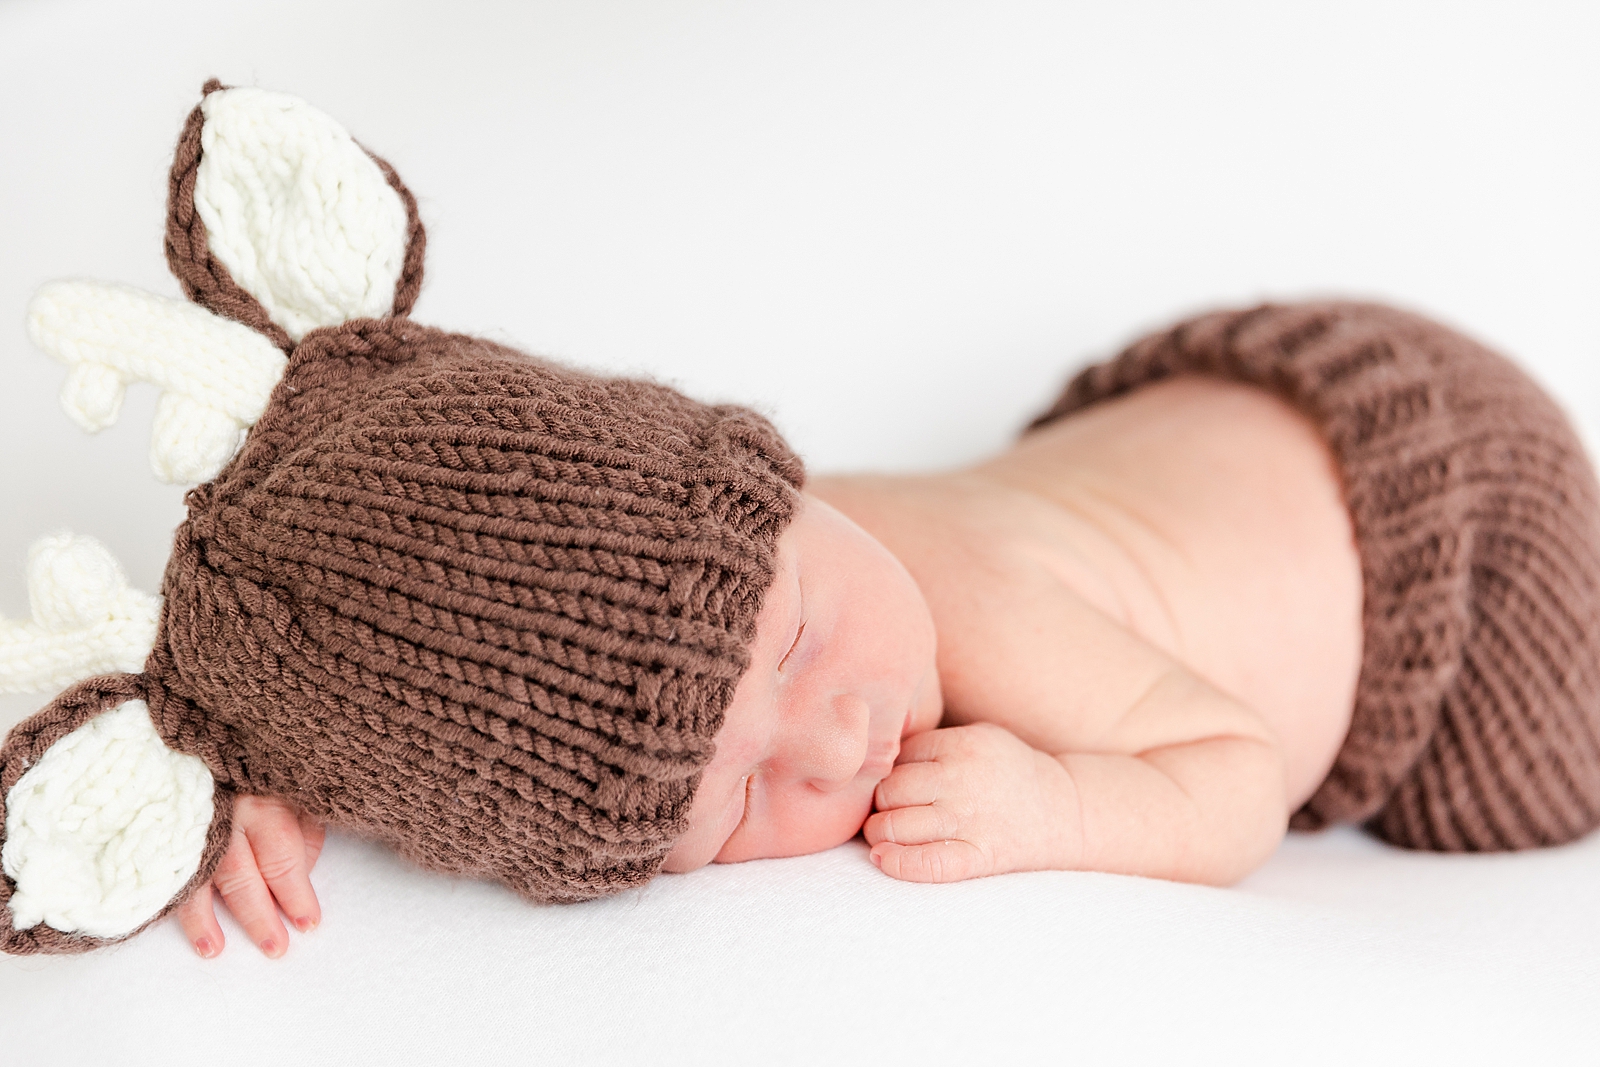 Newborn baby dressed in deer outfit sleeping on tummy on a white backdrop